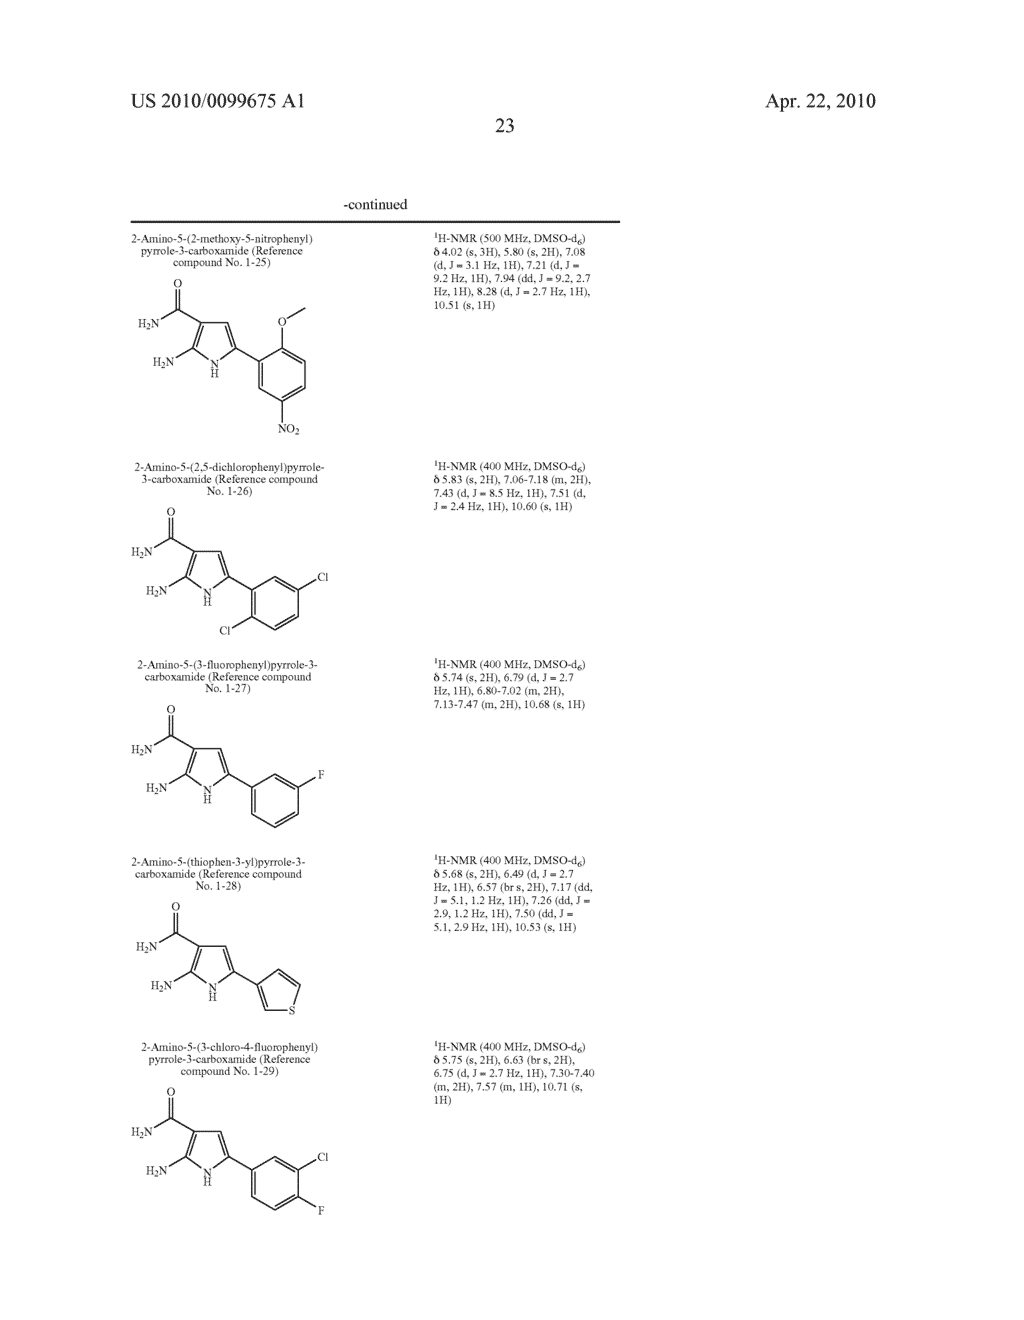 NOVEL PYRROLE DERIVATIVE HAVING UREIDO GROUP AND AMINOCARBONYL GROUP AS SUBSTITUENTS - diagram, schematic, and image 24